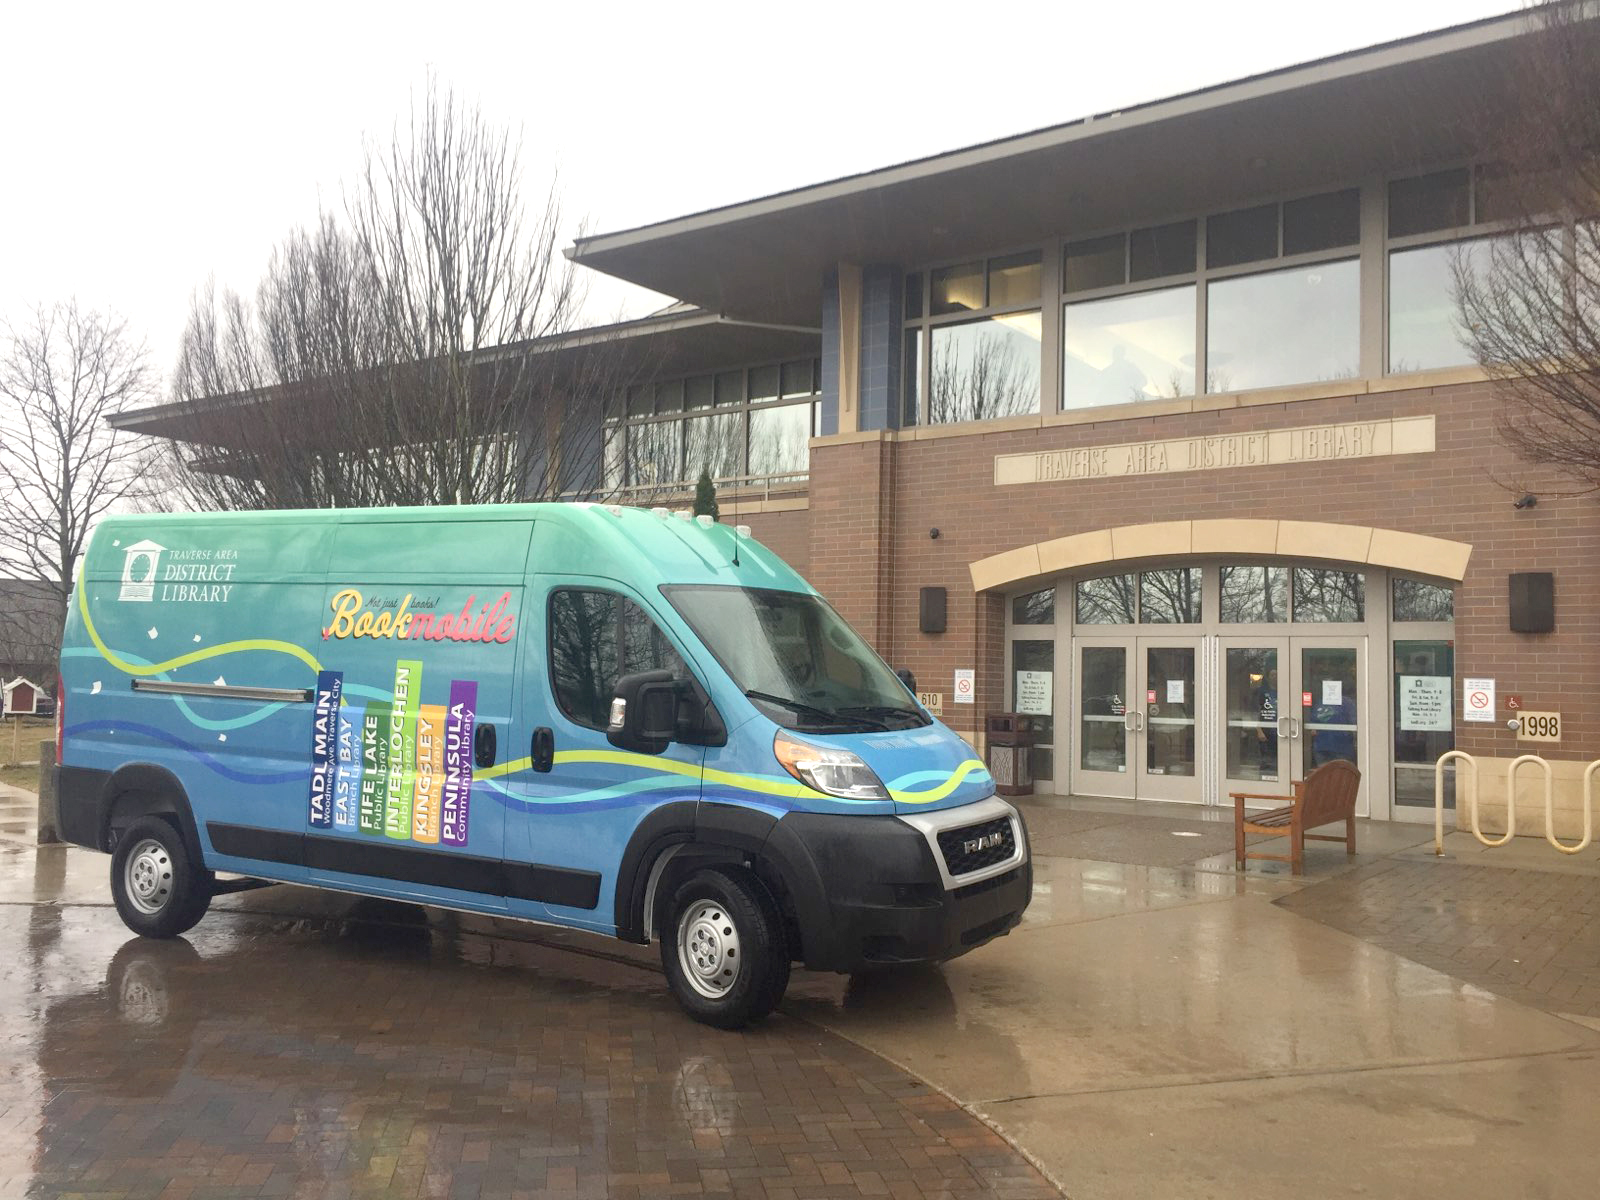 The green and blue bookmobile van parked outside the front door of the Main Library